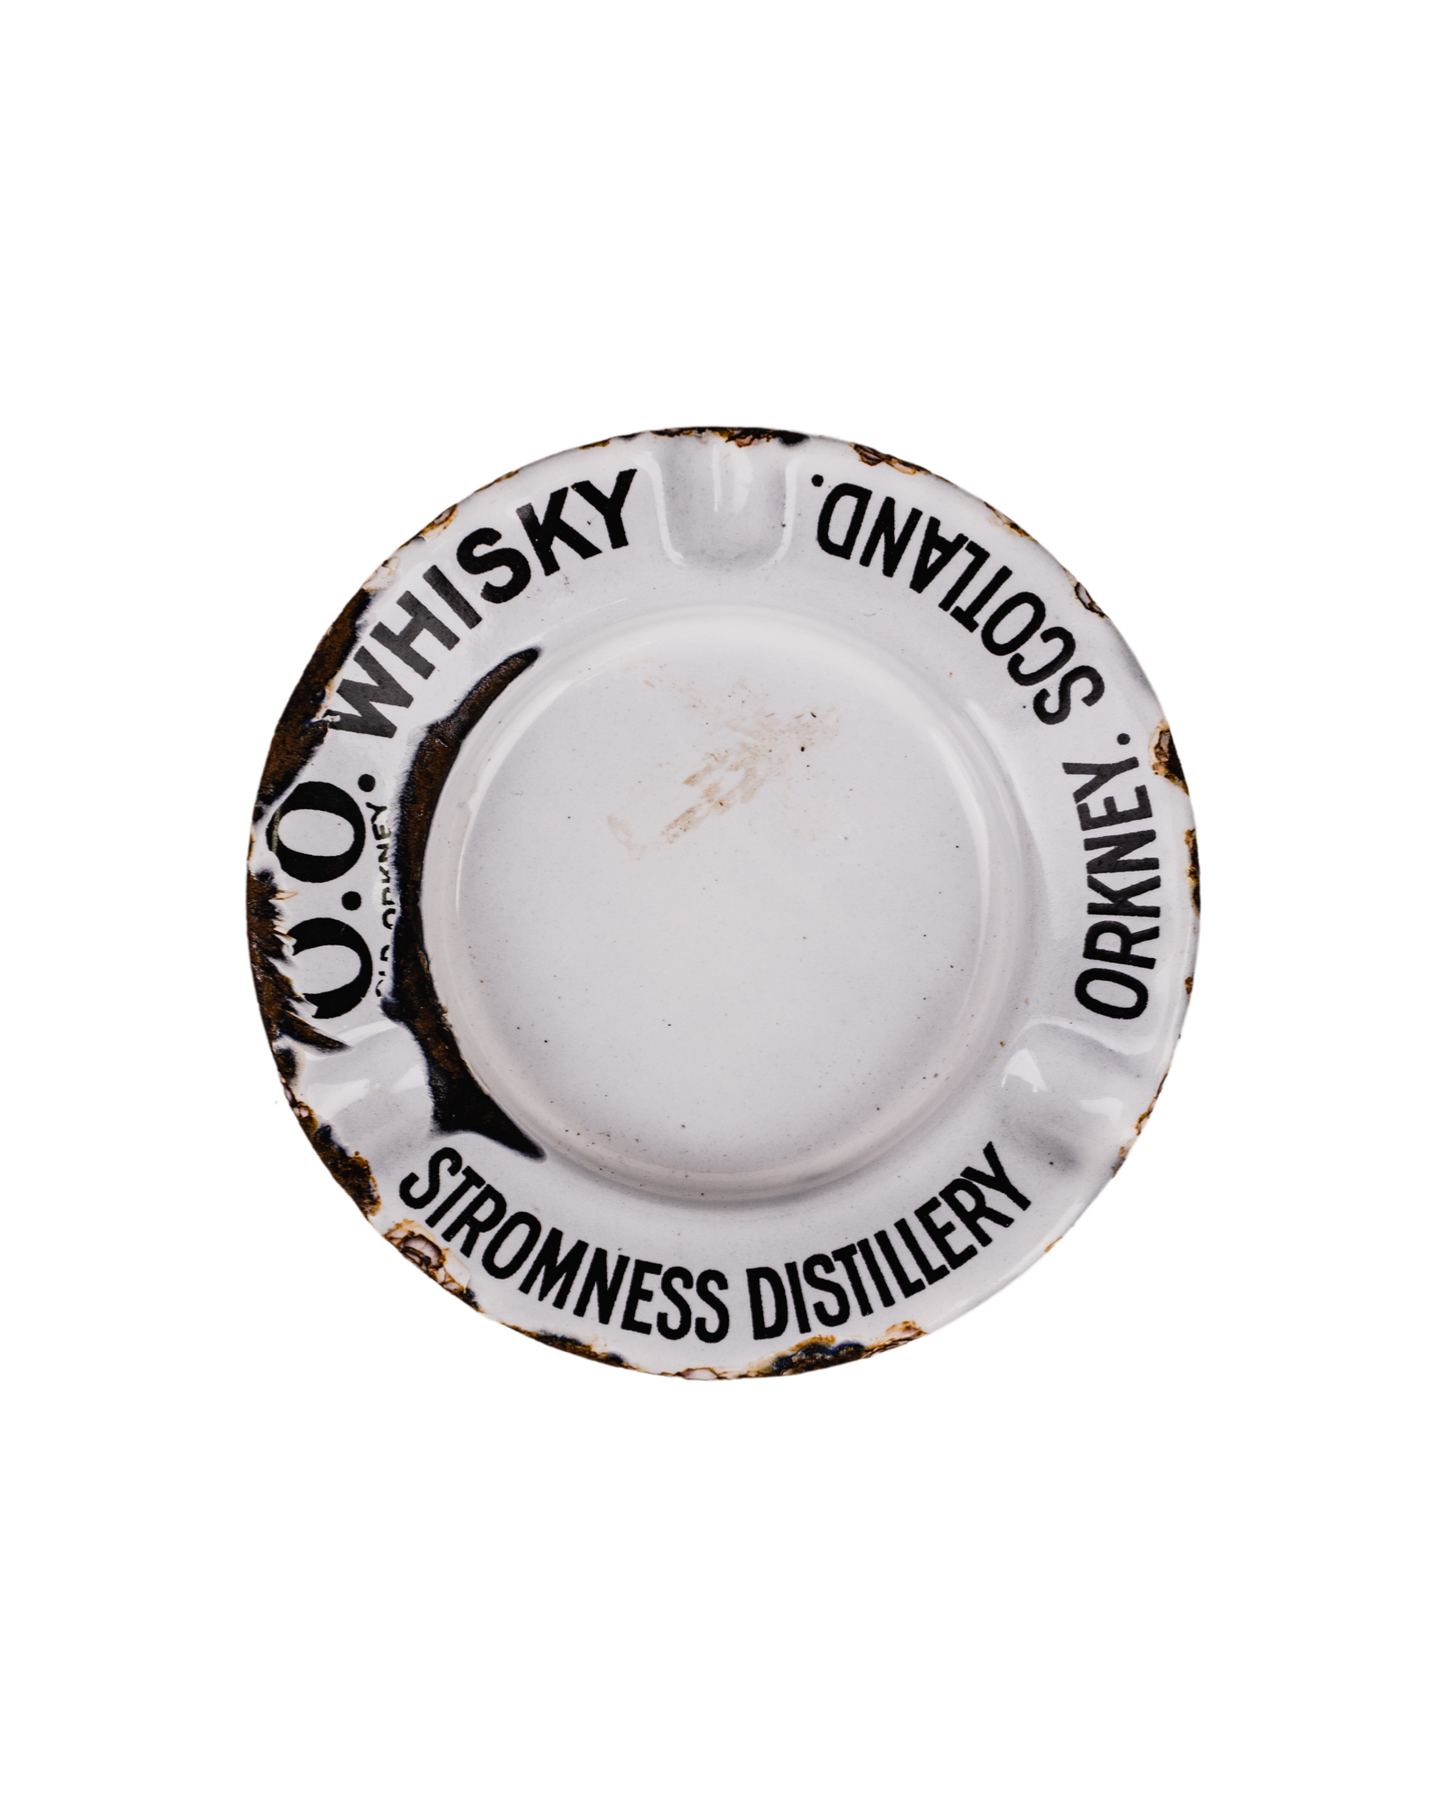 Early 1900s O.O. (Old Orkney) Whisky Enamelled Ashtray